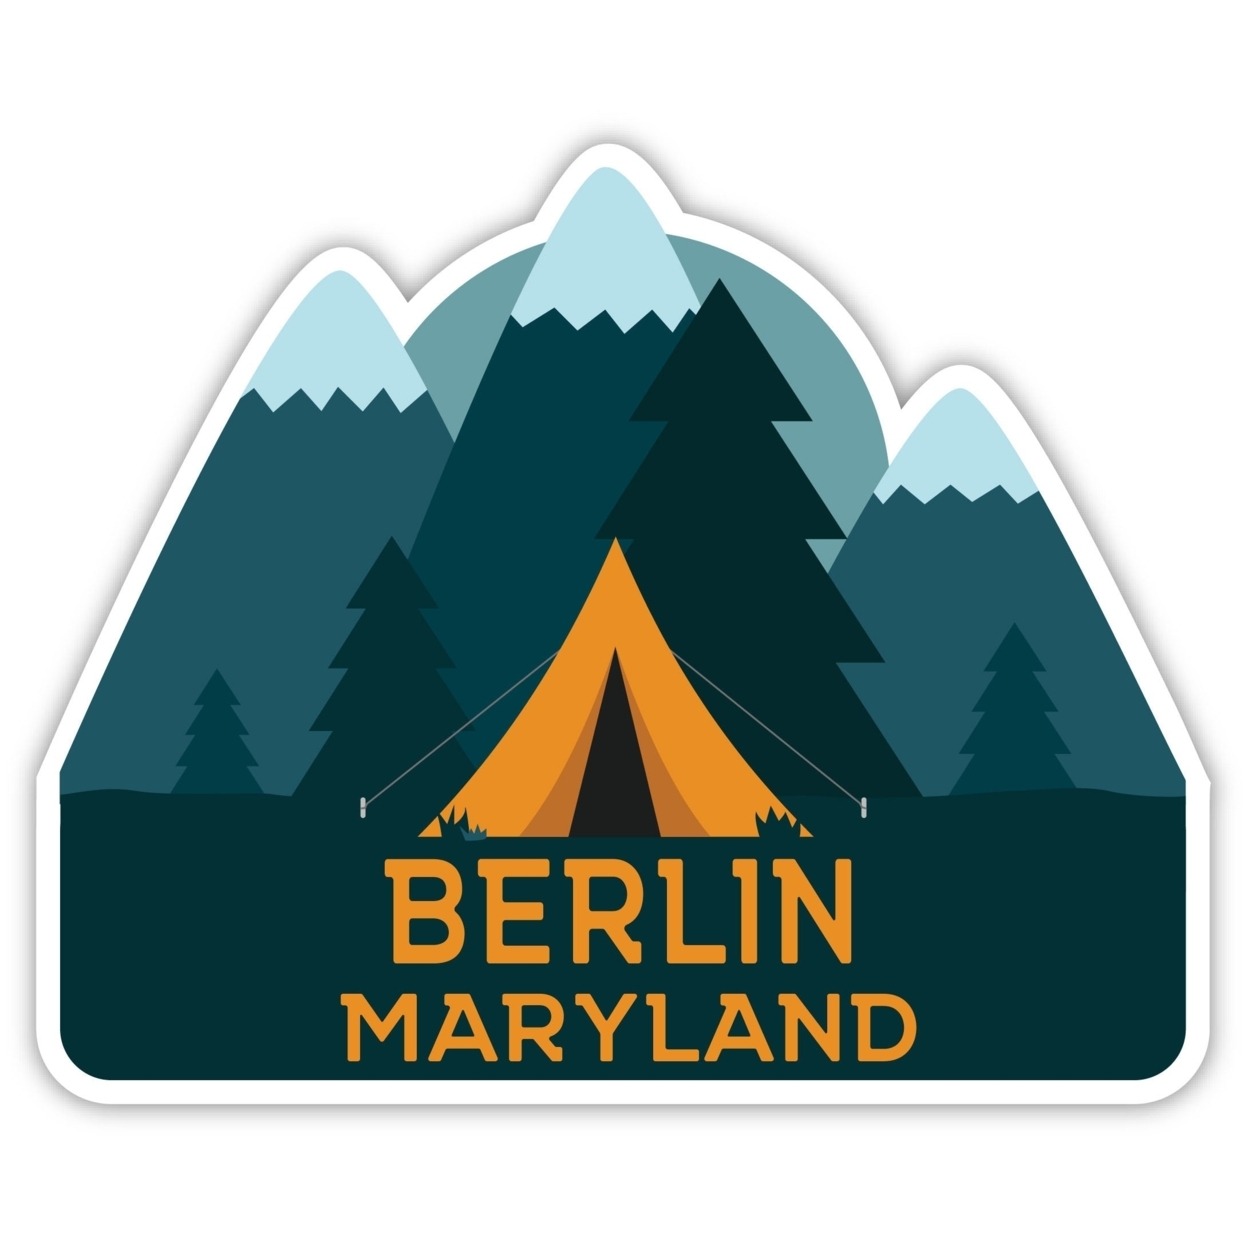 Berlin Maryland Souvenir Decorative Stickers (Choose Theme And Size) - Single Unit, 2-Inch, Tent